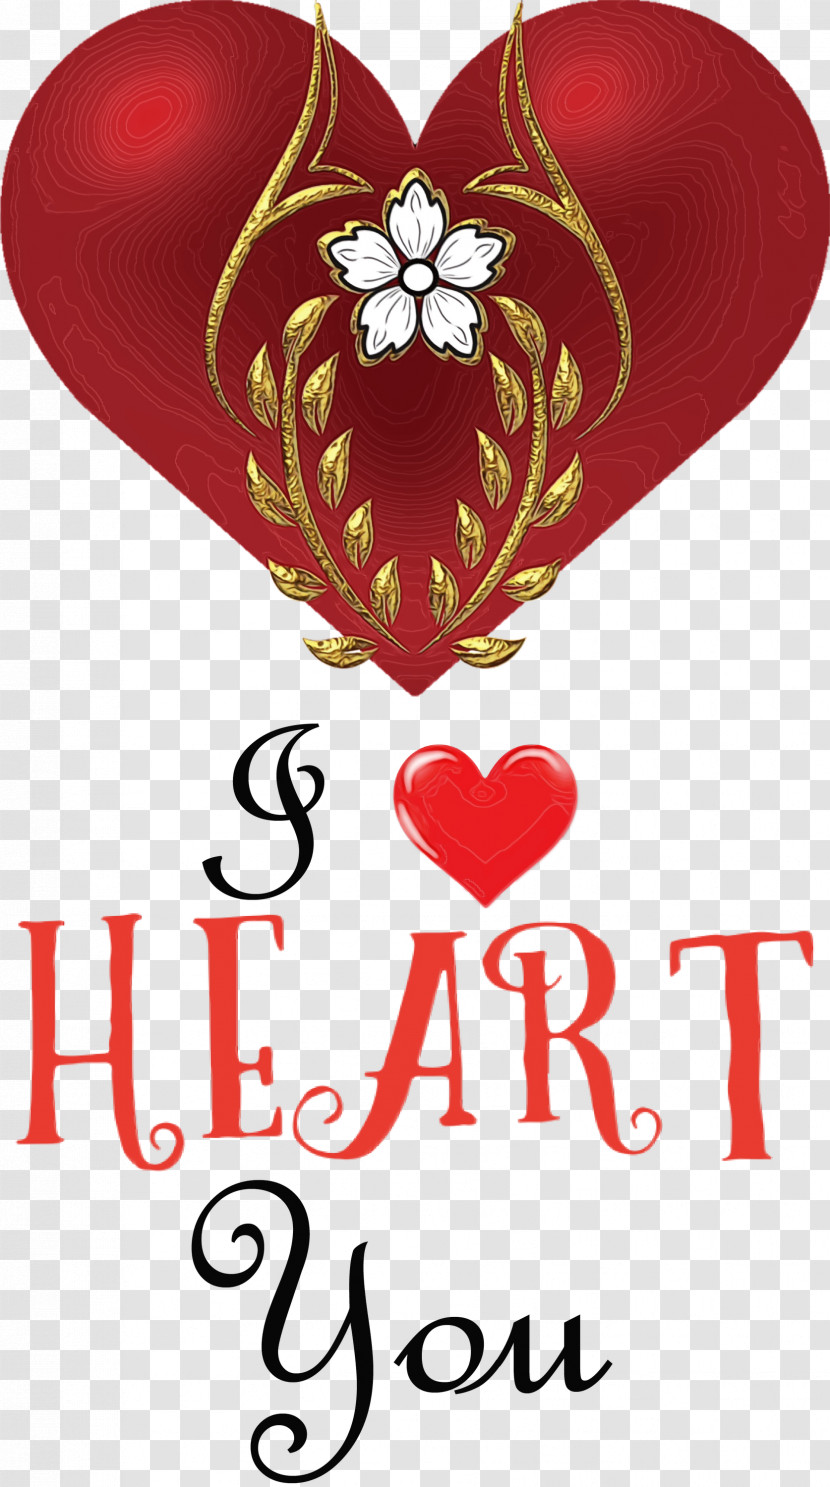 Heart Watercolor Painting Poster 易拉宝 16hearts Transparent PNG